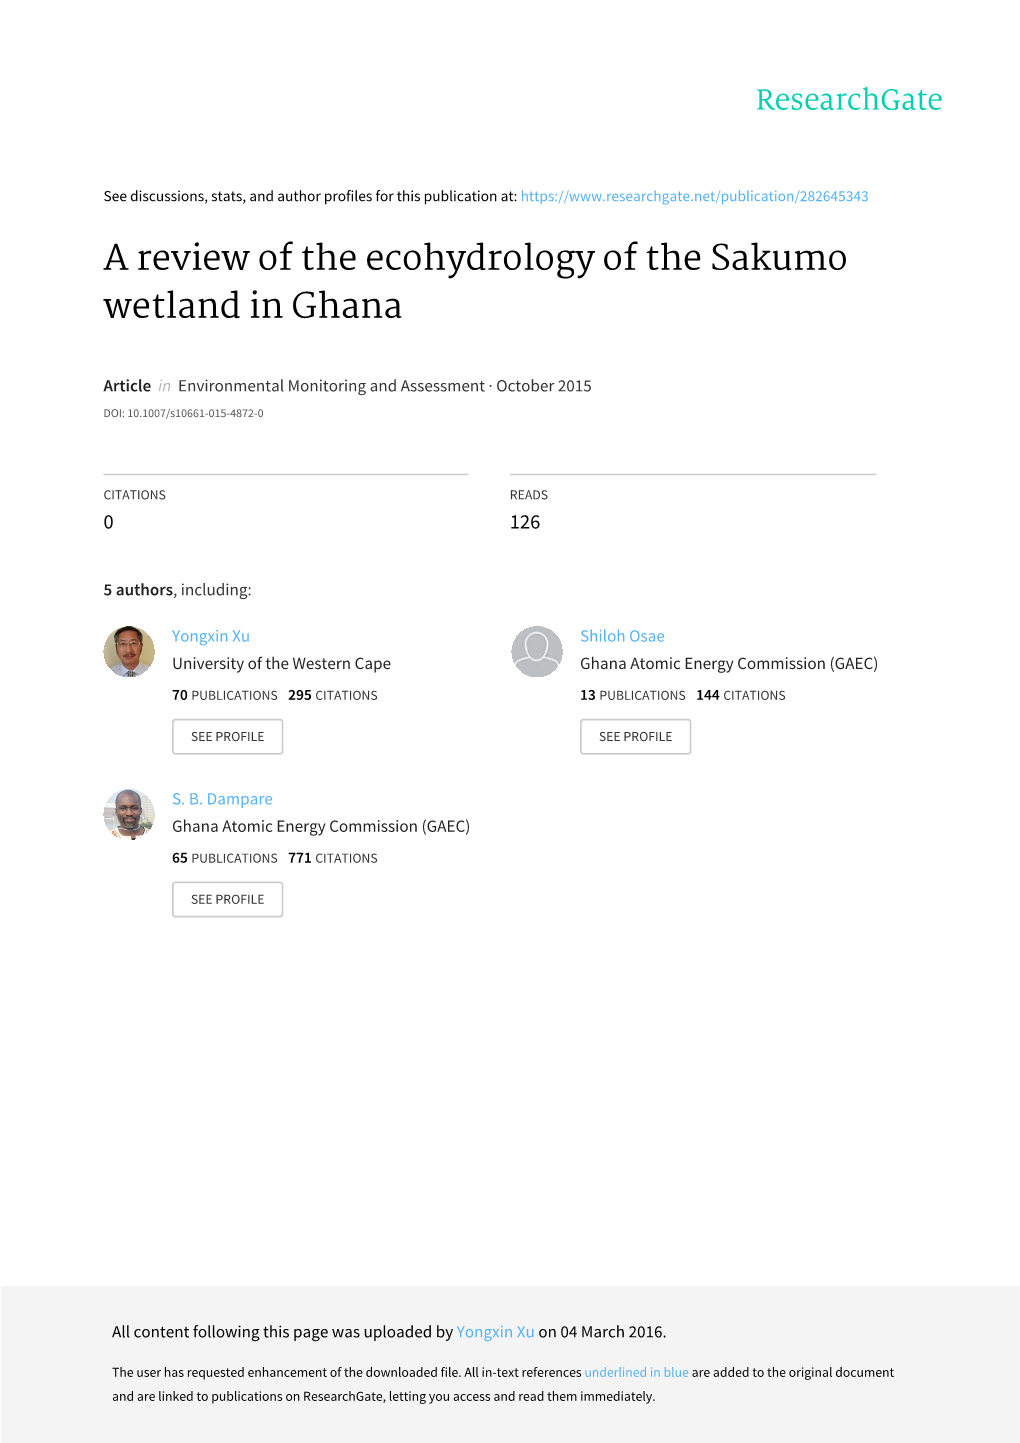 A Review of the Ecohydrology of the Sakumo Wetland in Ghana